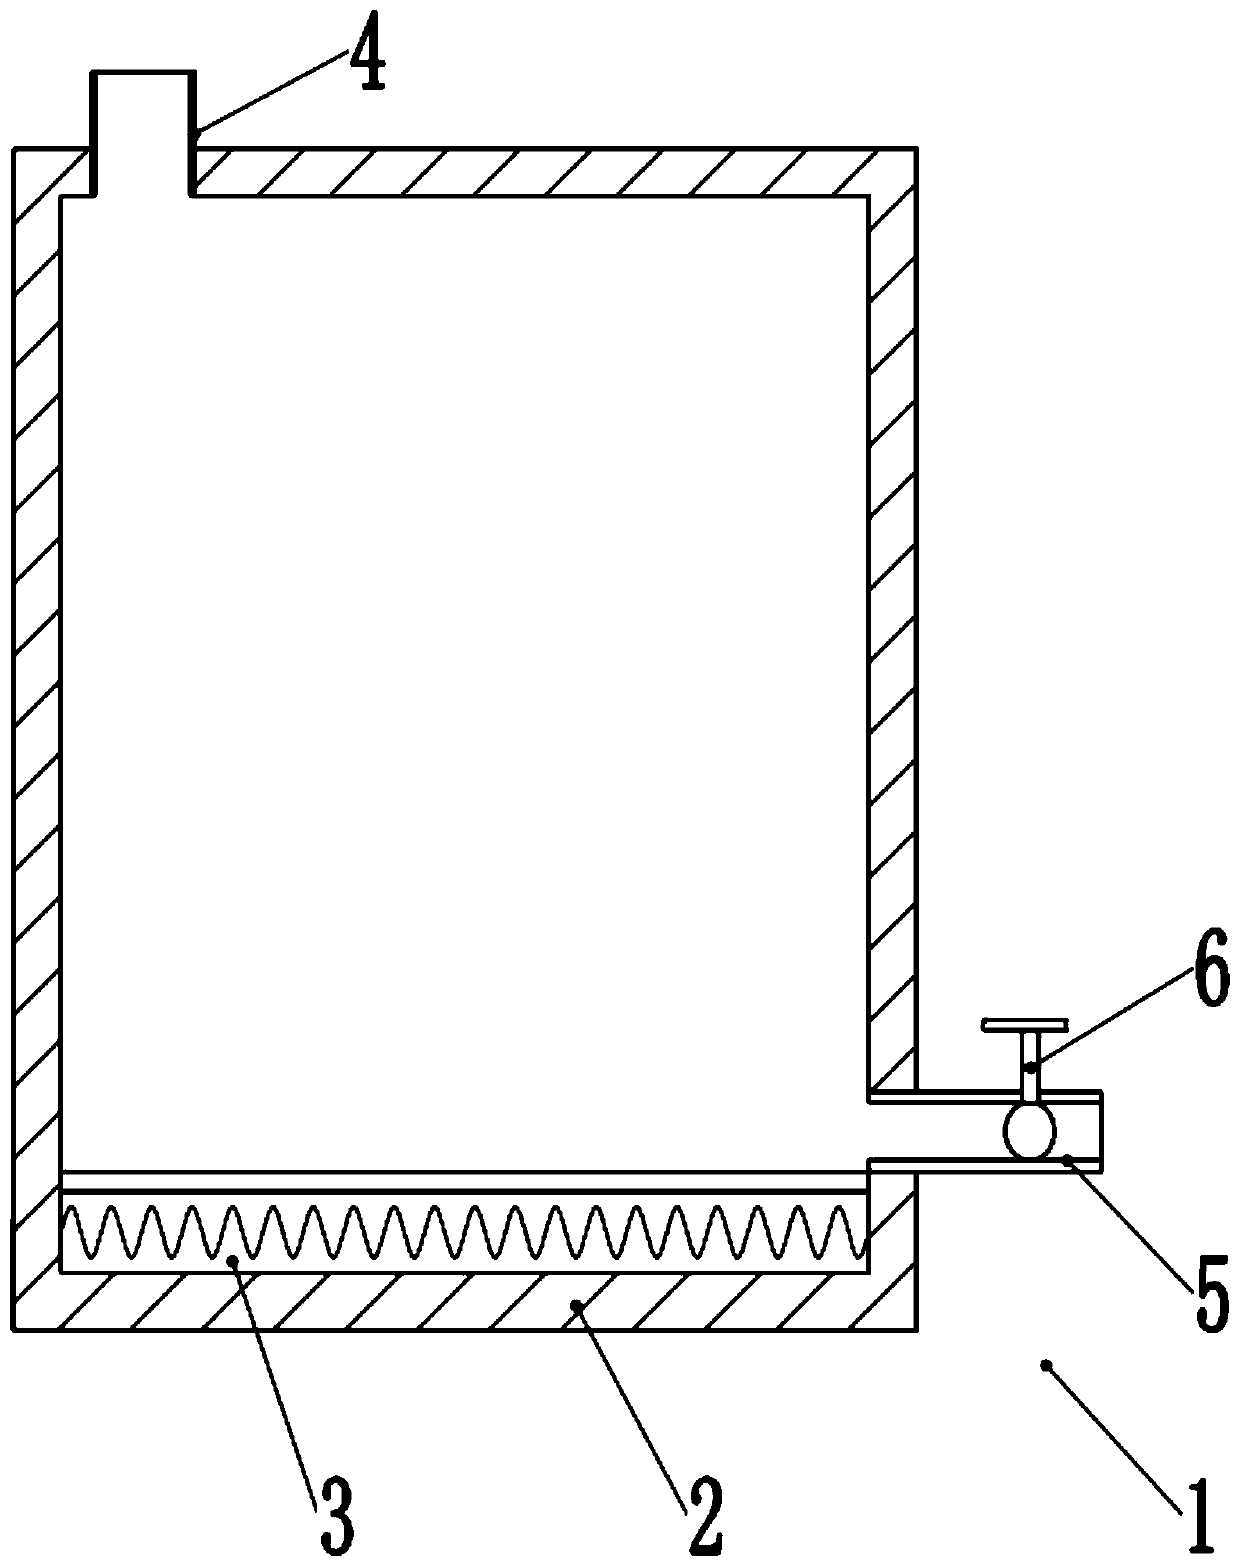 Device and process for recovering residual honey in honey barrel